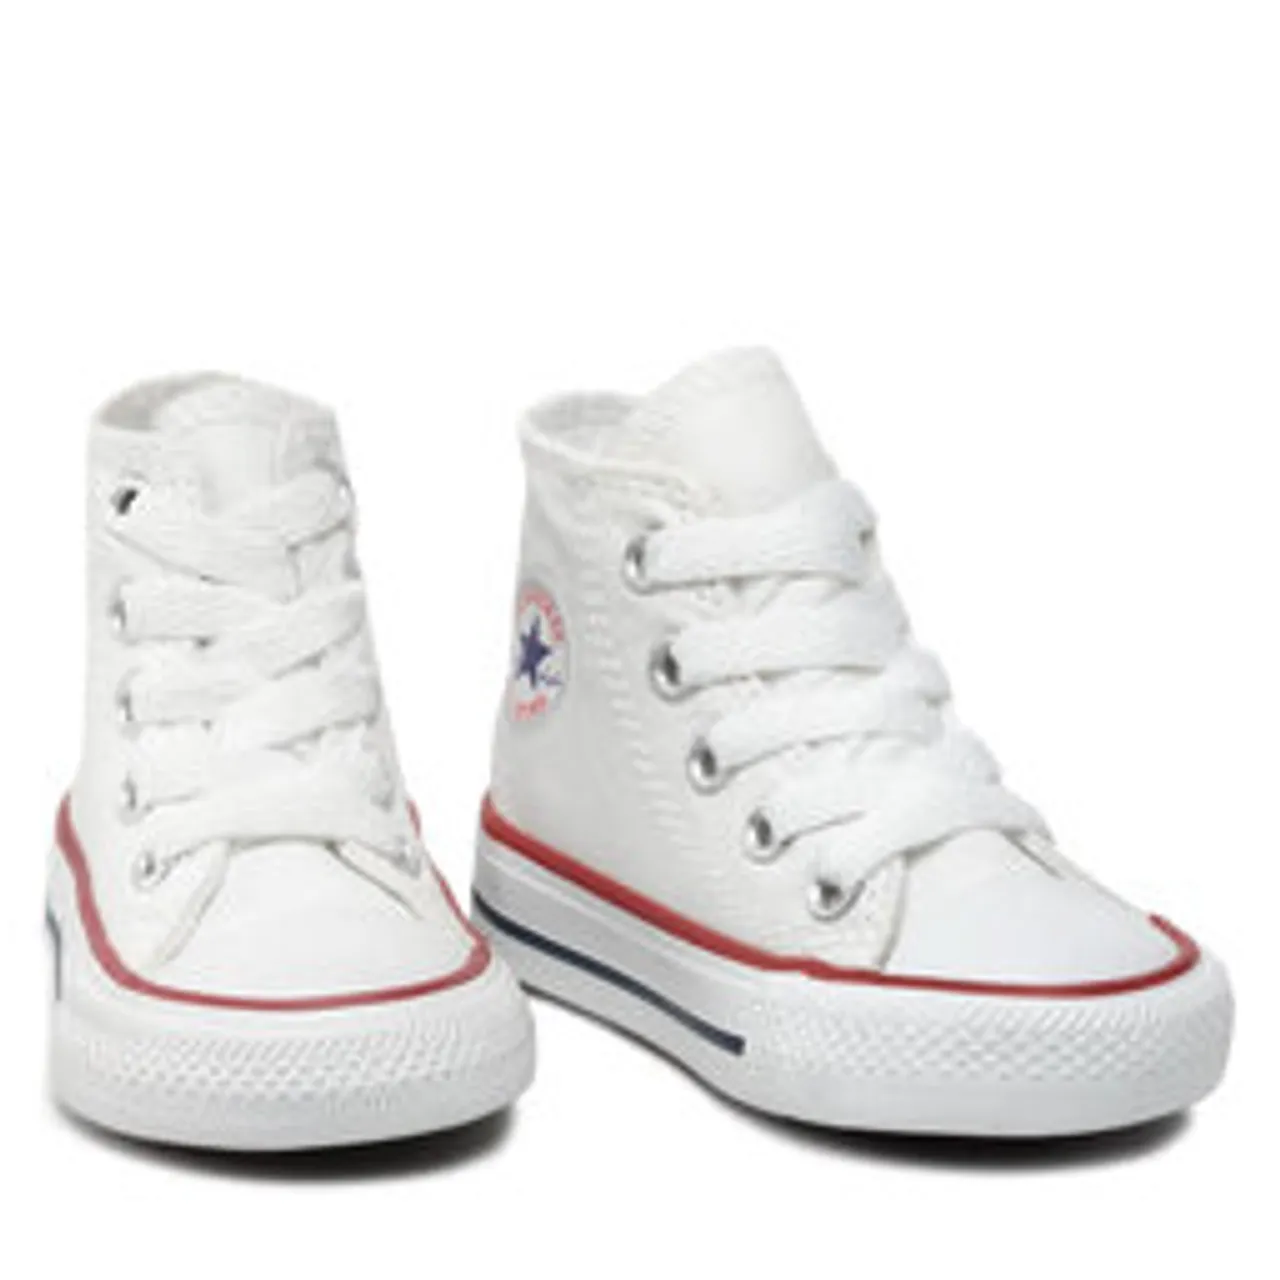 Sneakers aus Stoff Converse Inf C/T All Star Hi 7J253C Optical White